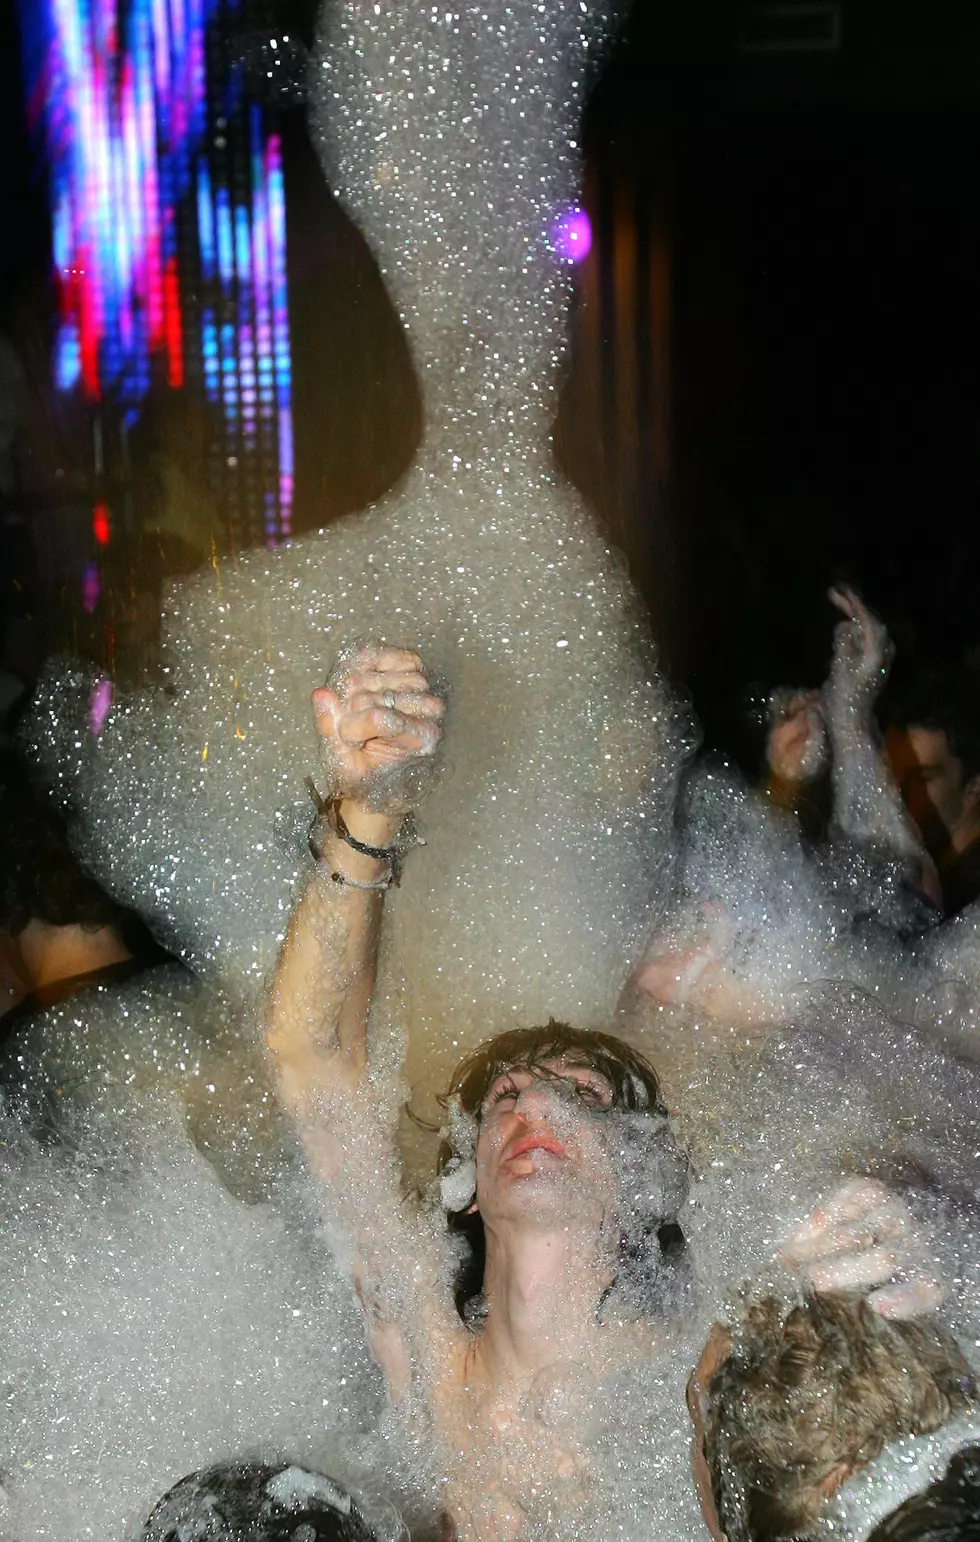 An Old Dude’s Thoughts on Foam Parties